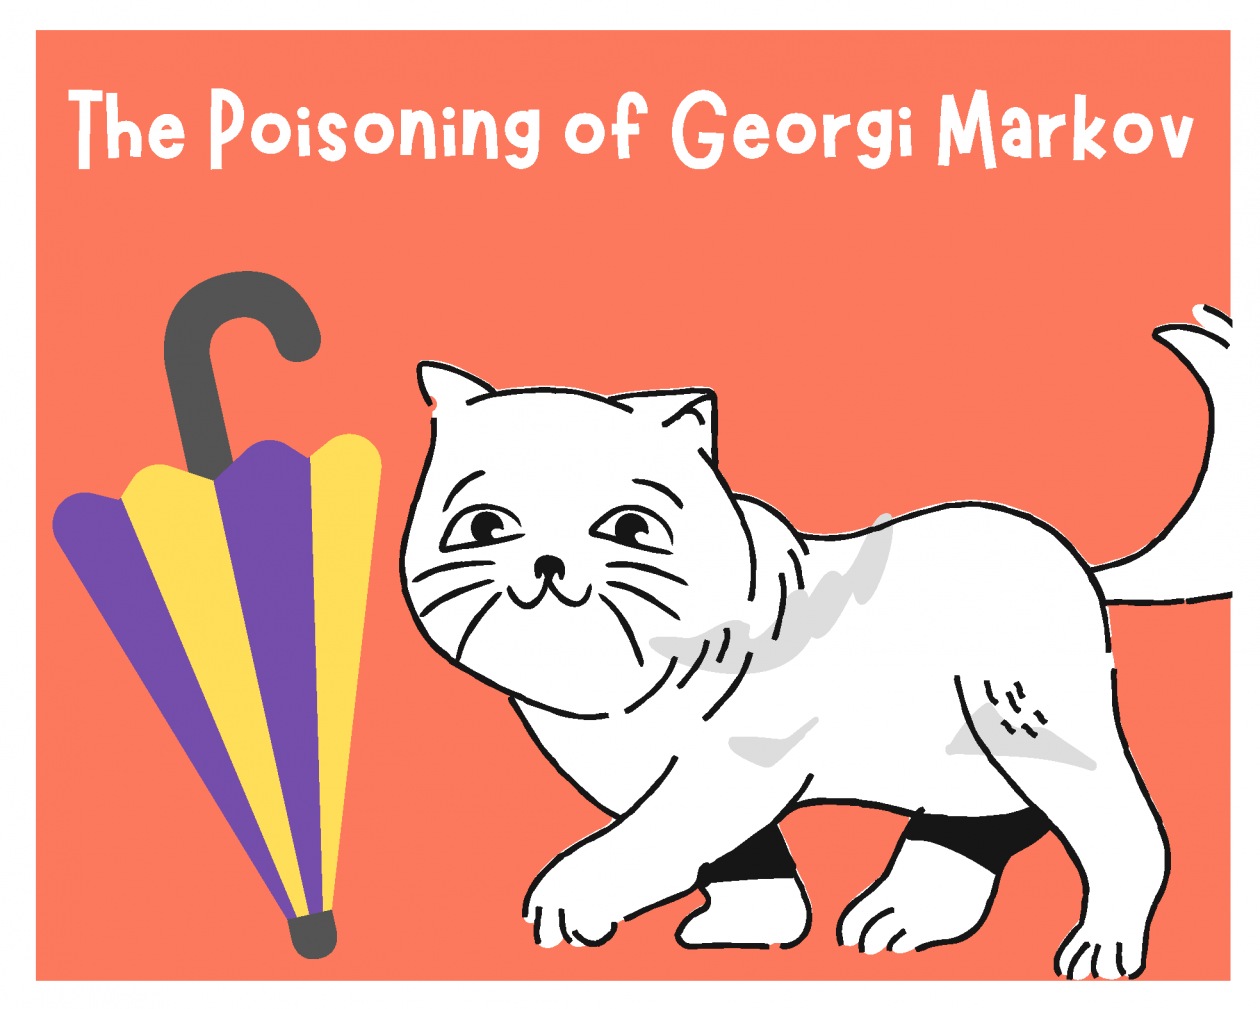 An image of the book cover "The Poisoning of Georgi Markov"